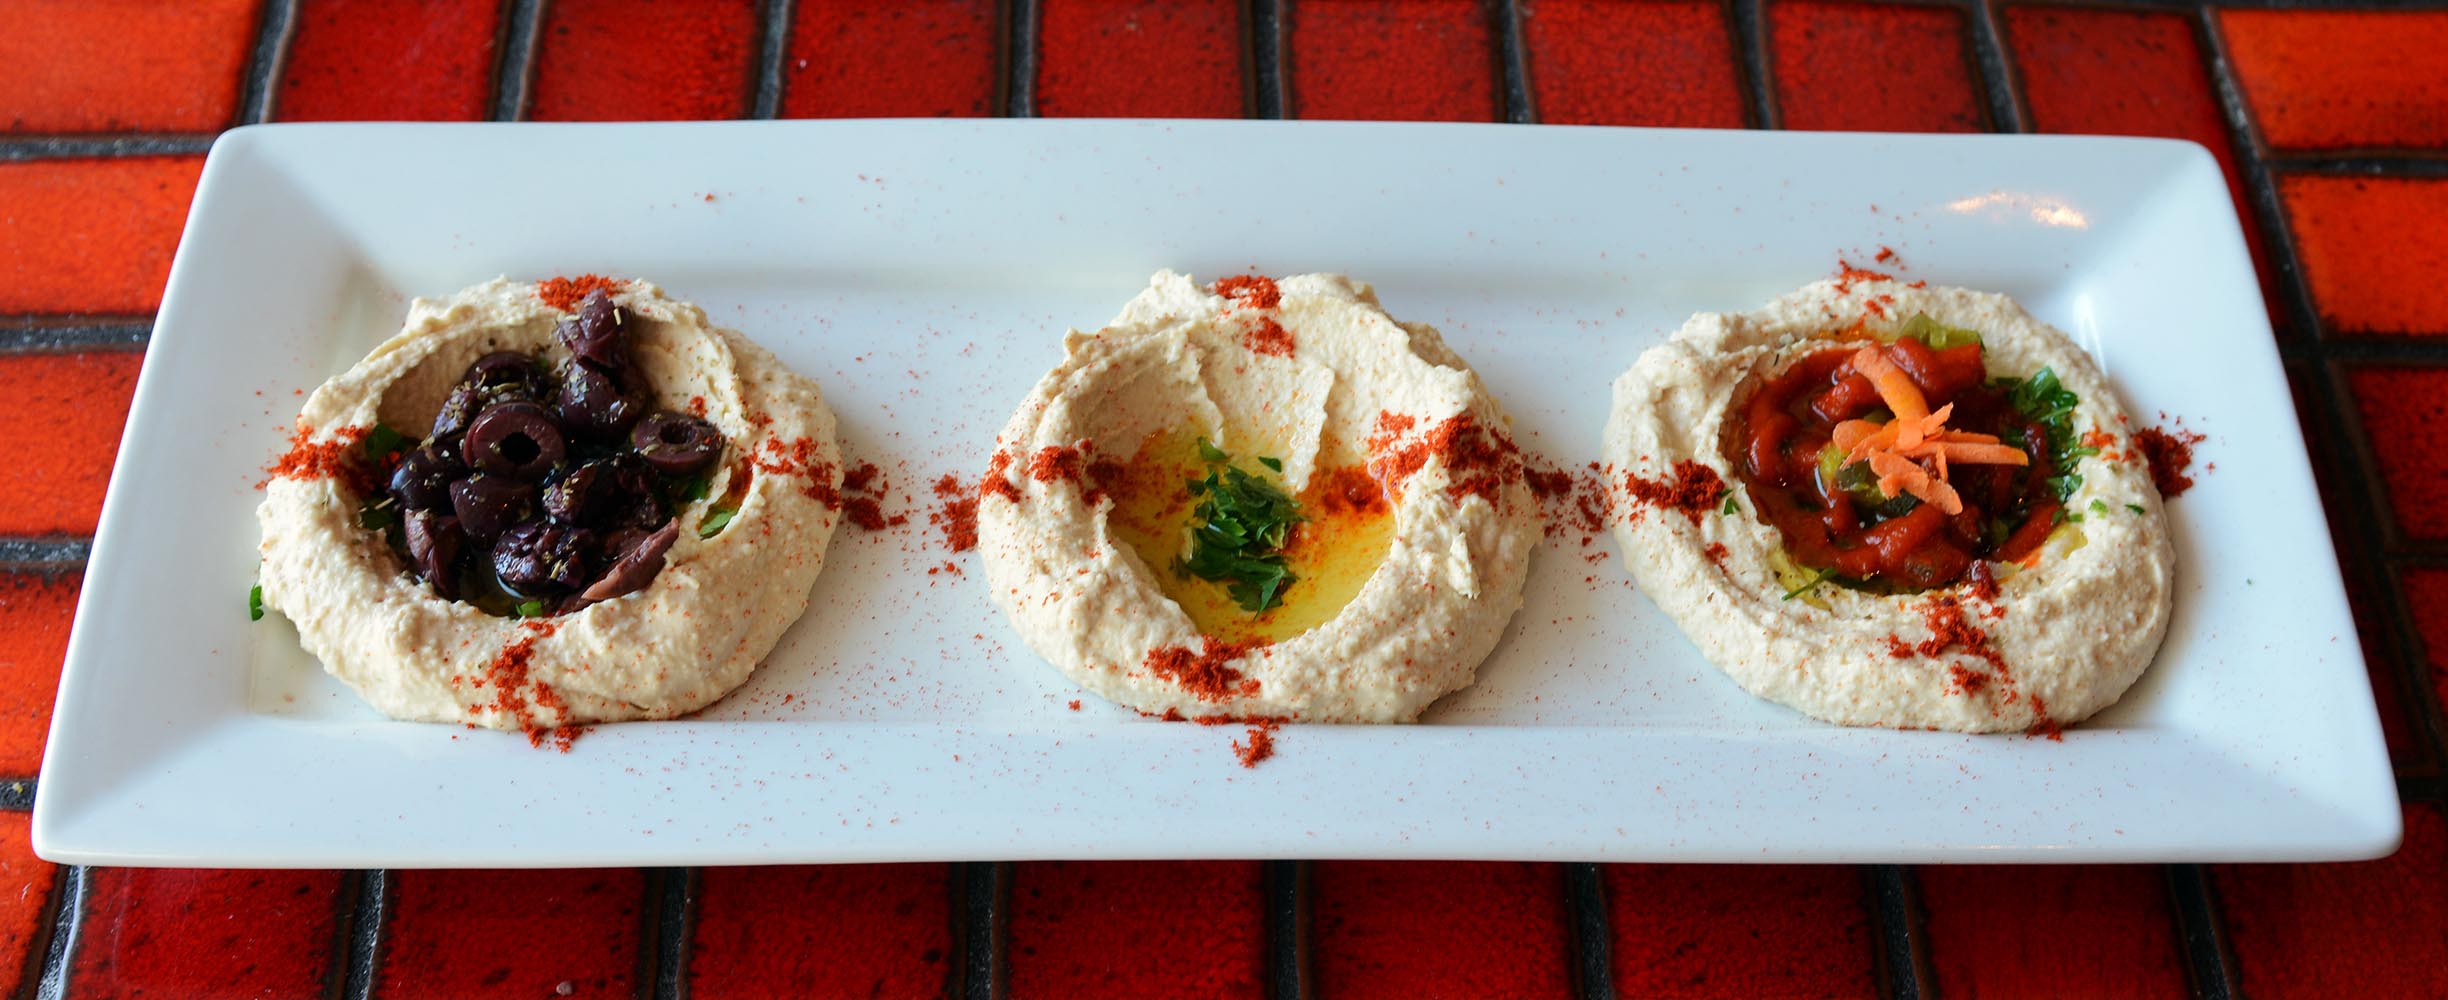 One of our restaurant's prefered appetizers: Hummus Trio, including our traditional hummus, kalamata olives hummus, and sriracha jalapeños hummus.